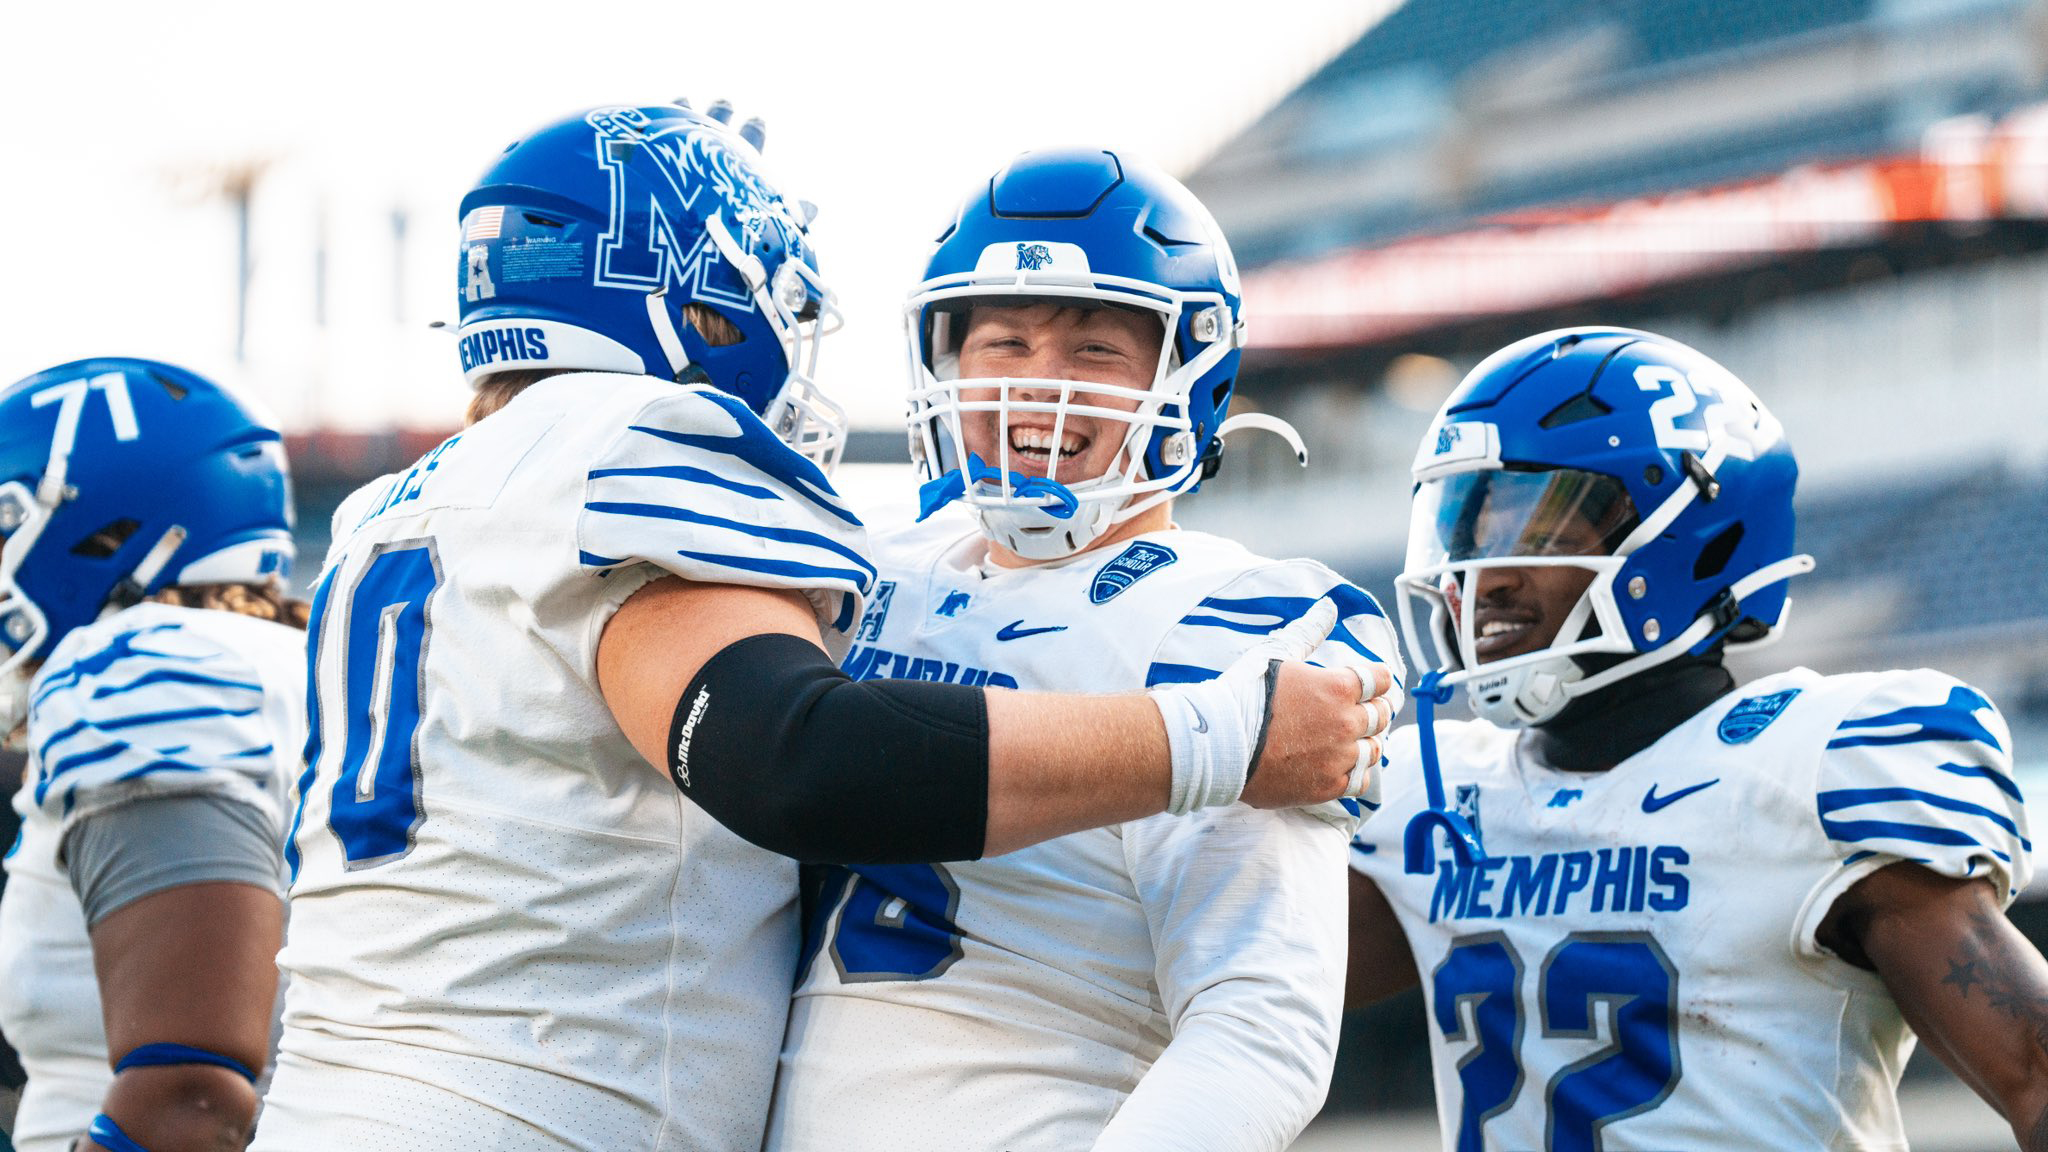 Brendan Doyle fits right in at Memphis, College football - The Pajaronian